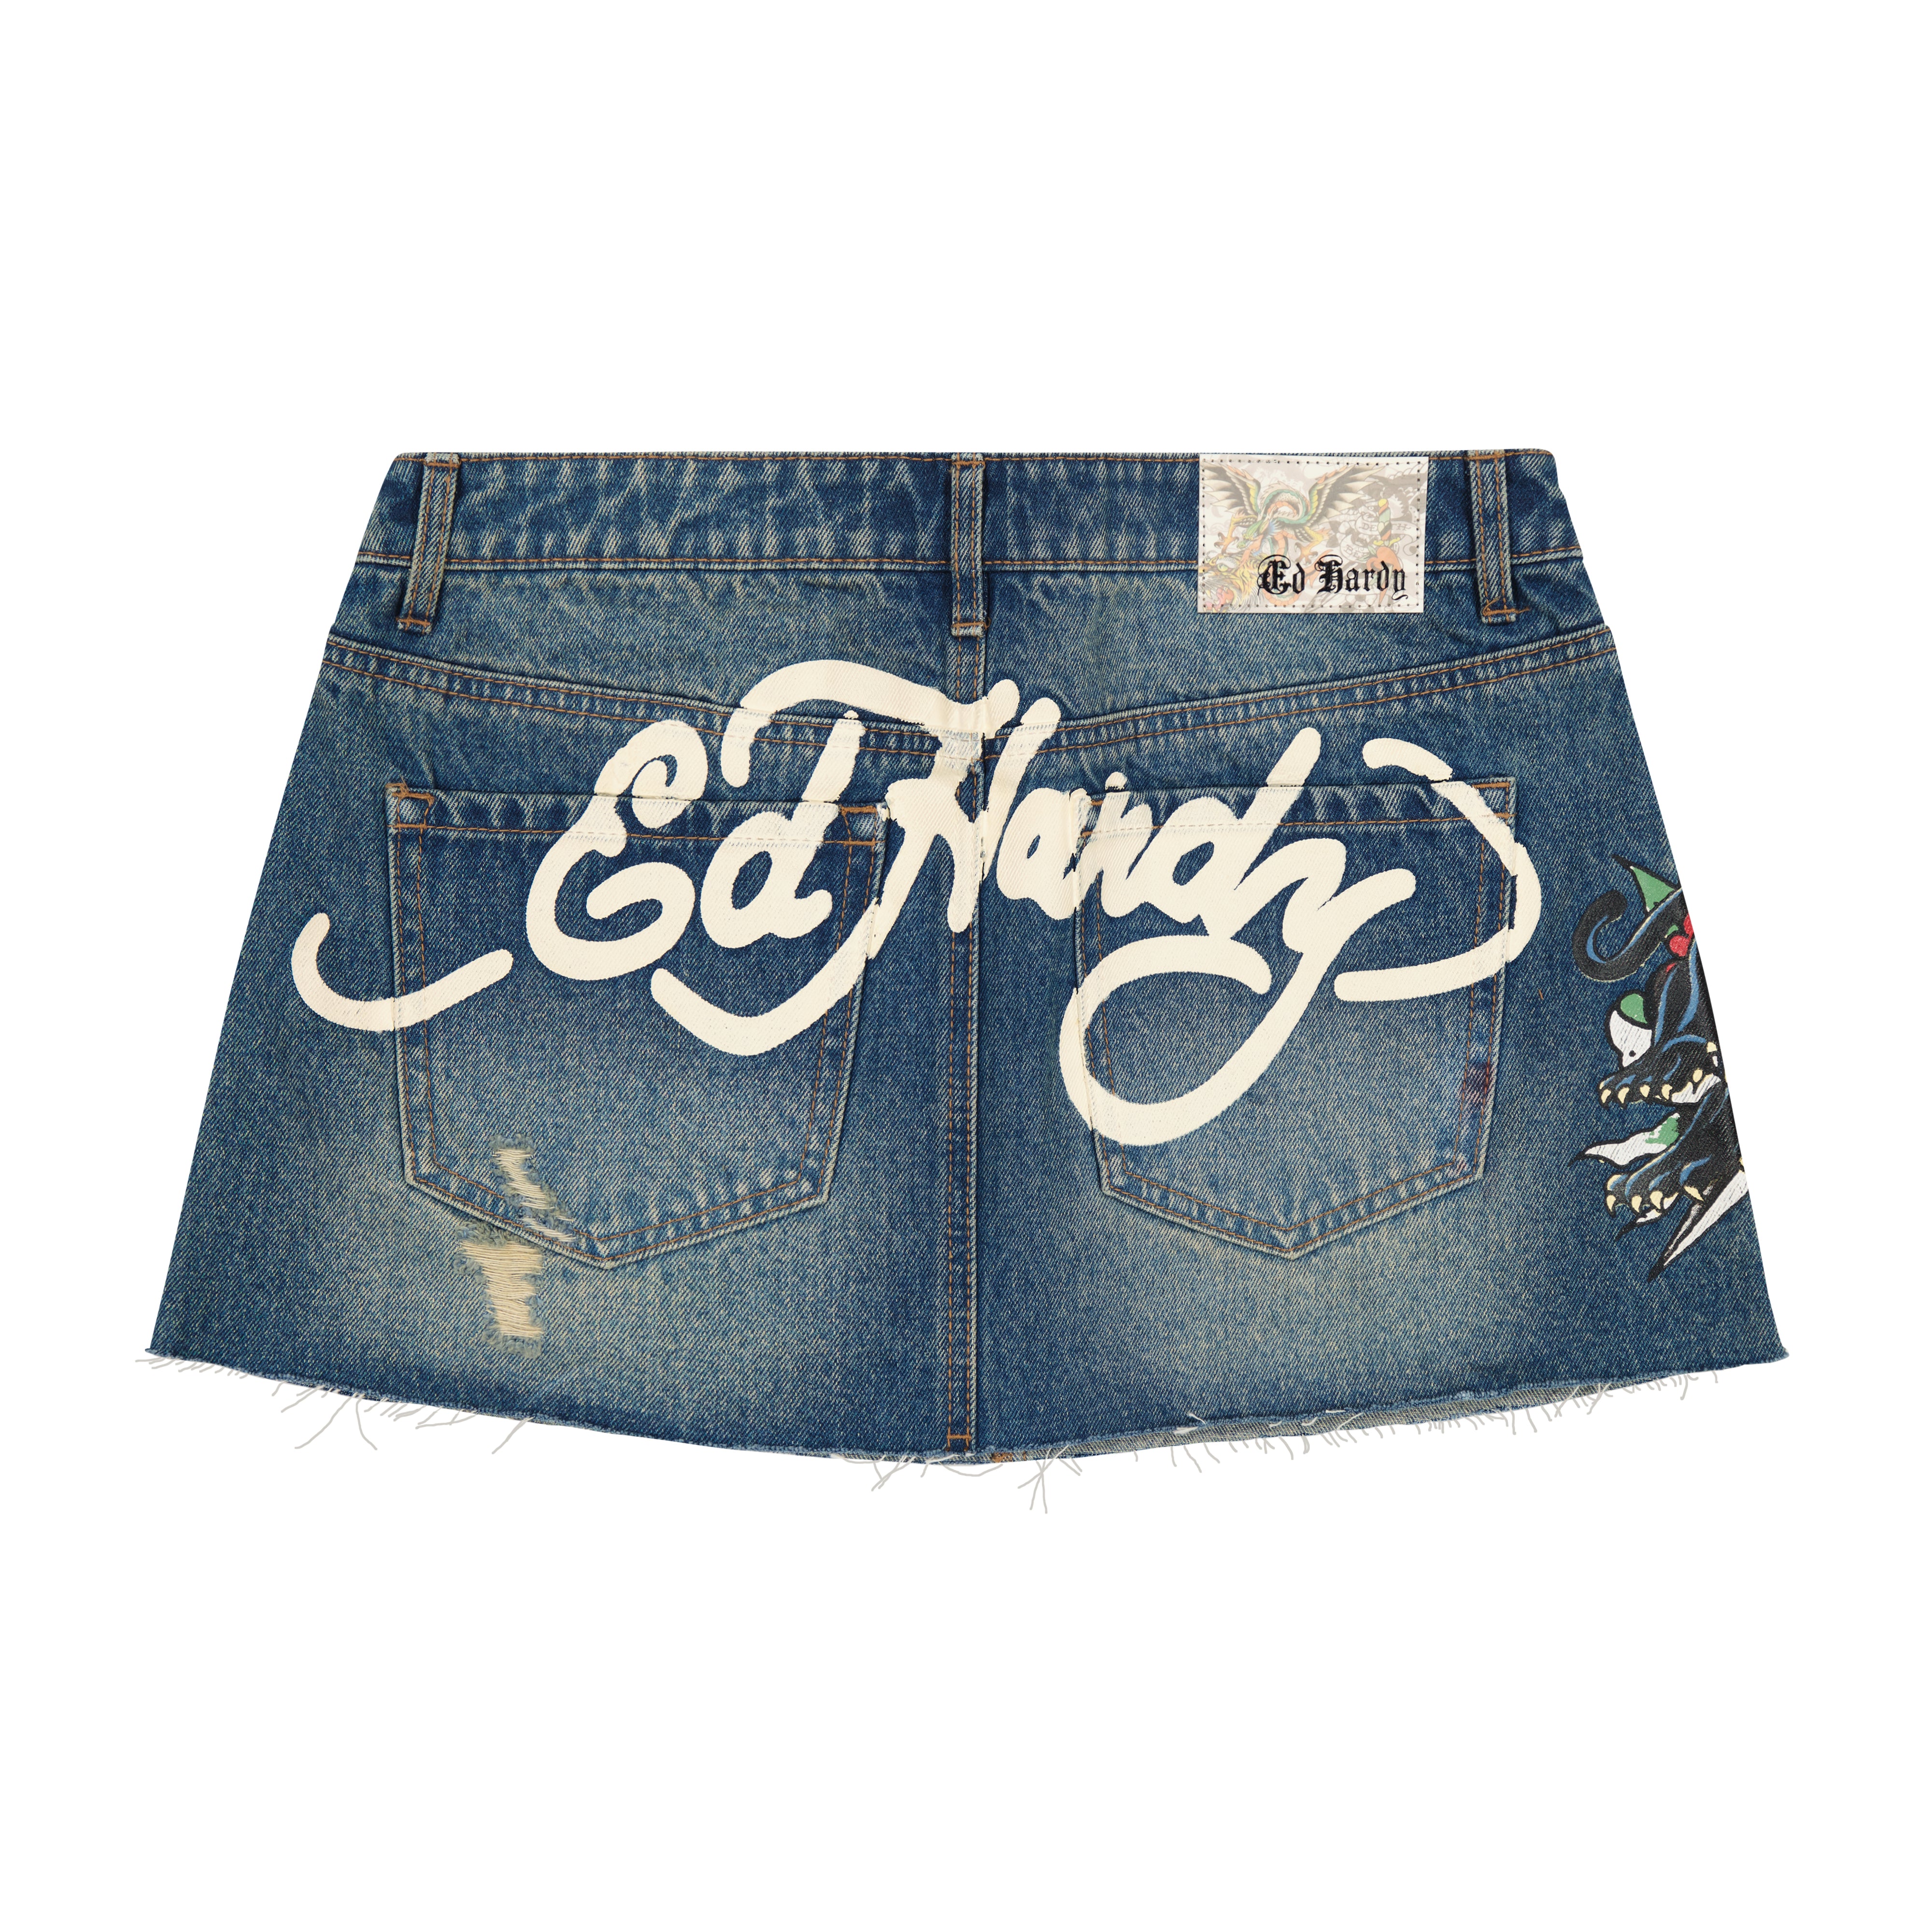 Ed Hardy ally short sleep set with tiger motif in mint blue and black |  McocongresShops